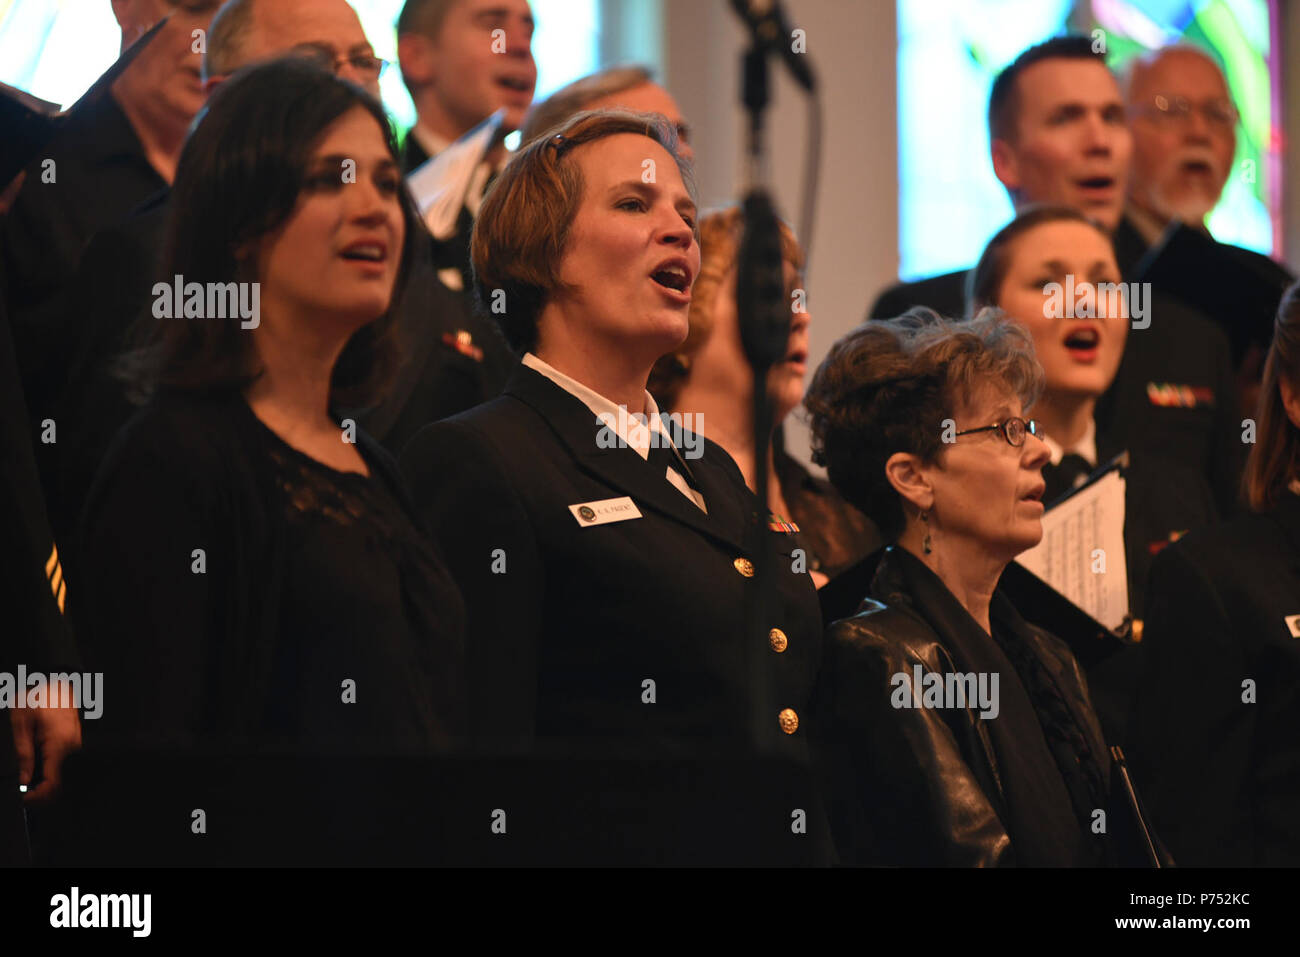 ANNANDALE, VIRGINIA  (October 30, 2016) Petty Officer 1st Class Kristen Pagent, center, performs with the U.S. Navy Band Sea Chanters chorus during their 60th anniversary concert. The Sea Chanters chorus celebrated their 60th anniversary iin Annandale, Virginia, with a concert featuring alumni from the group. The chorus was formed as an all-male group in 1956 and tasked with perpetuating the songs of the sea. In 1980, the group added women to their ranks and expanded their repertoire to include everything from Brahms to Broadway. Stock Photo